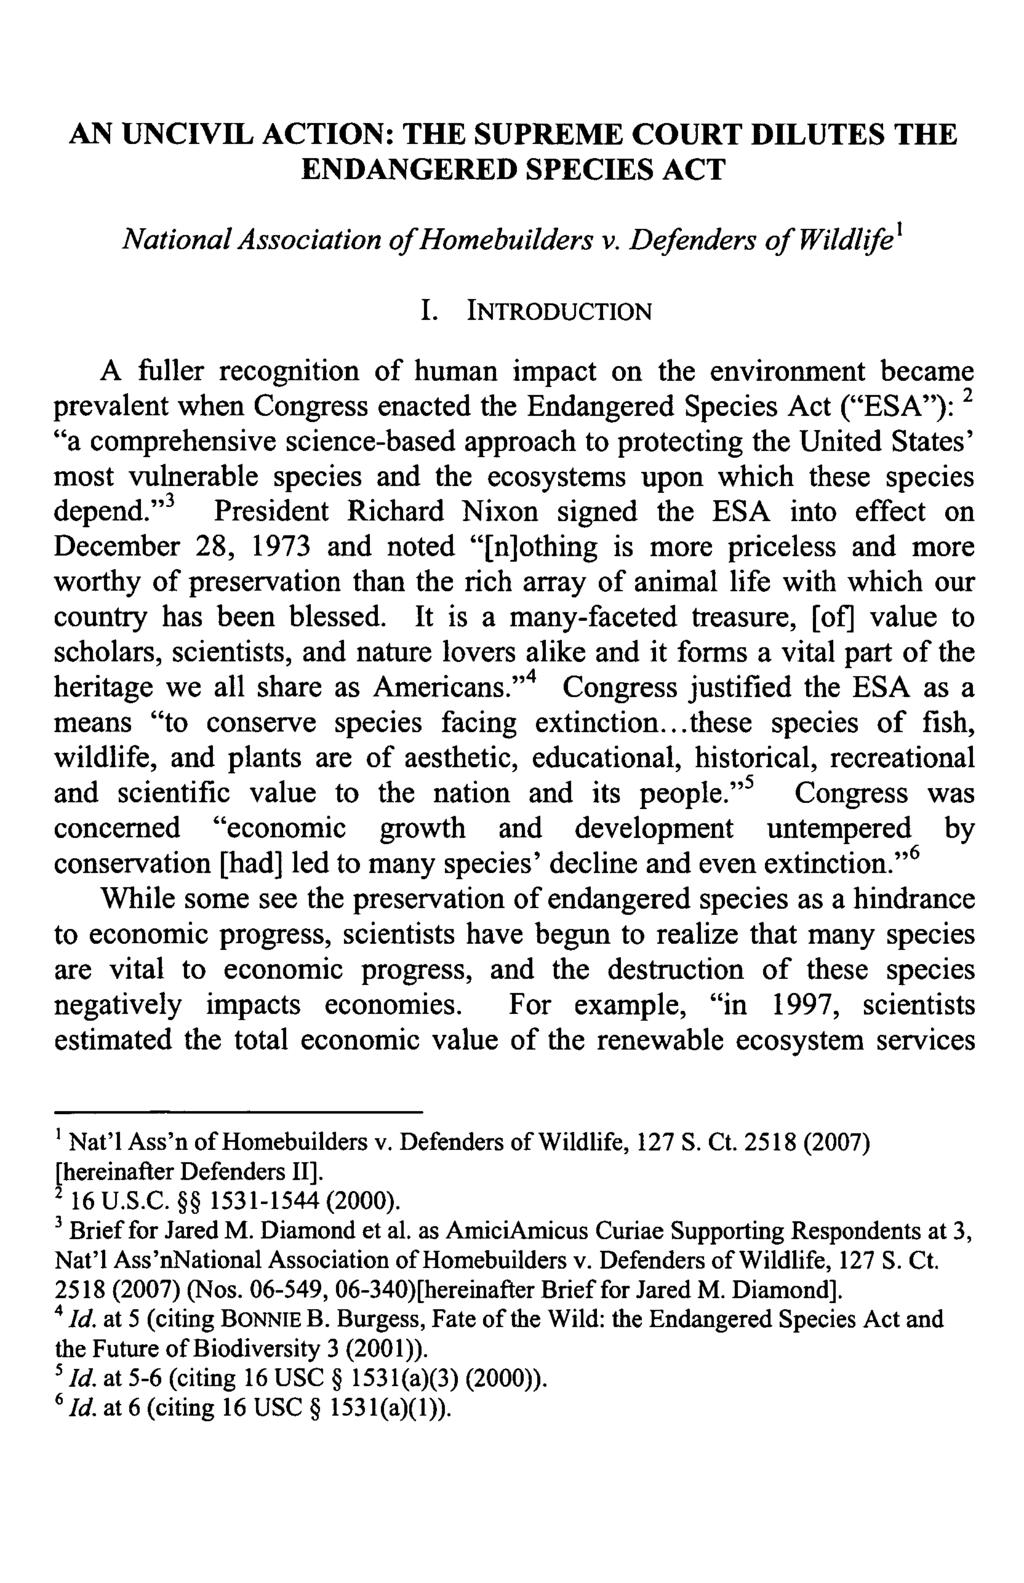 AN UNCIVEL ACTION: THE SUPREME COURT DILUTES THE ENDANGERED SPECIES ACT National Association of Homebuilders v. Defenders of Wildlife' I.